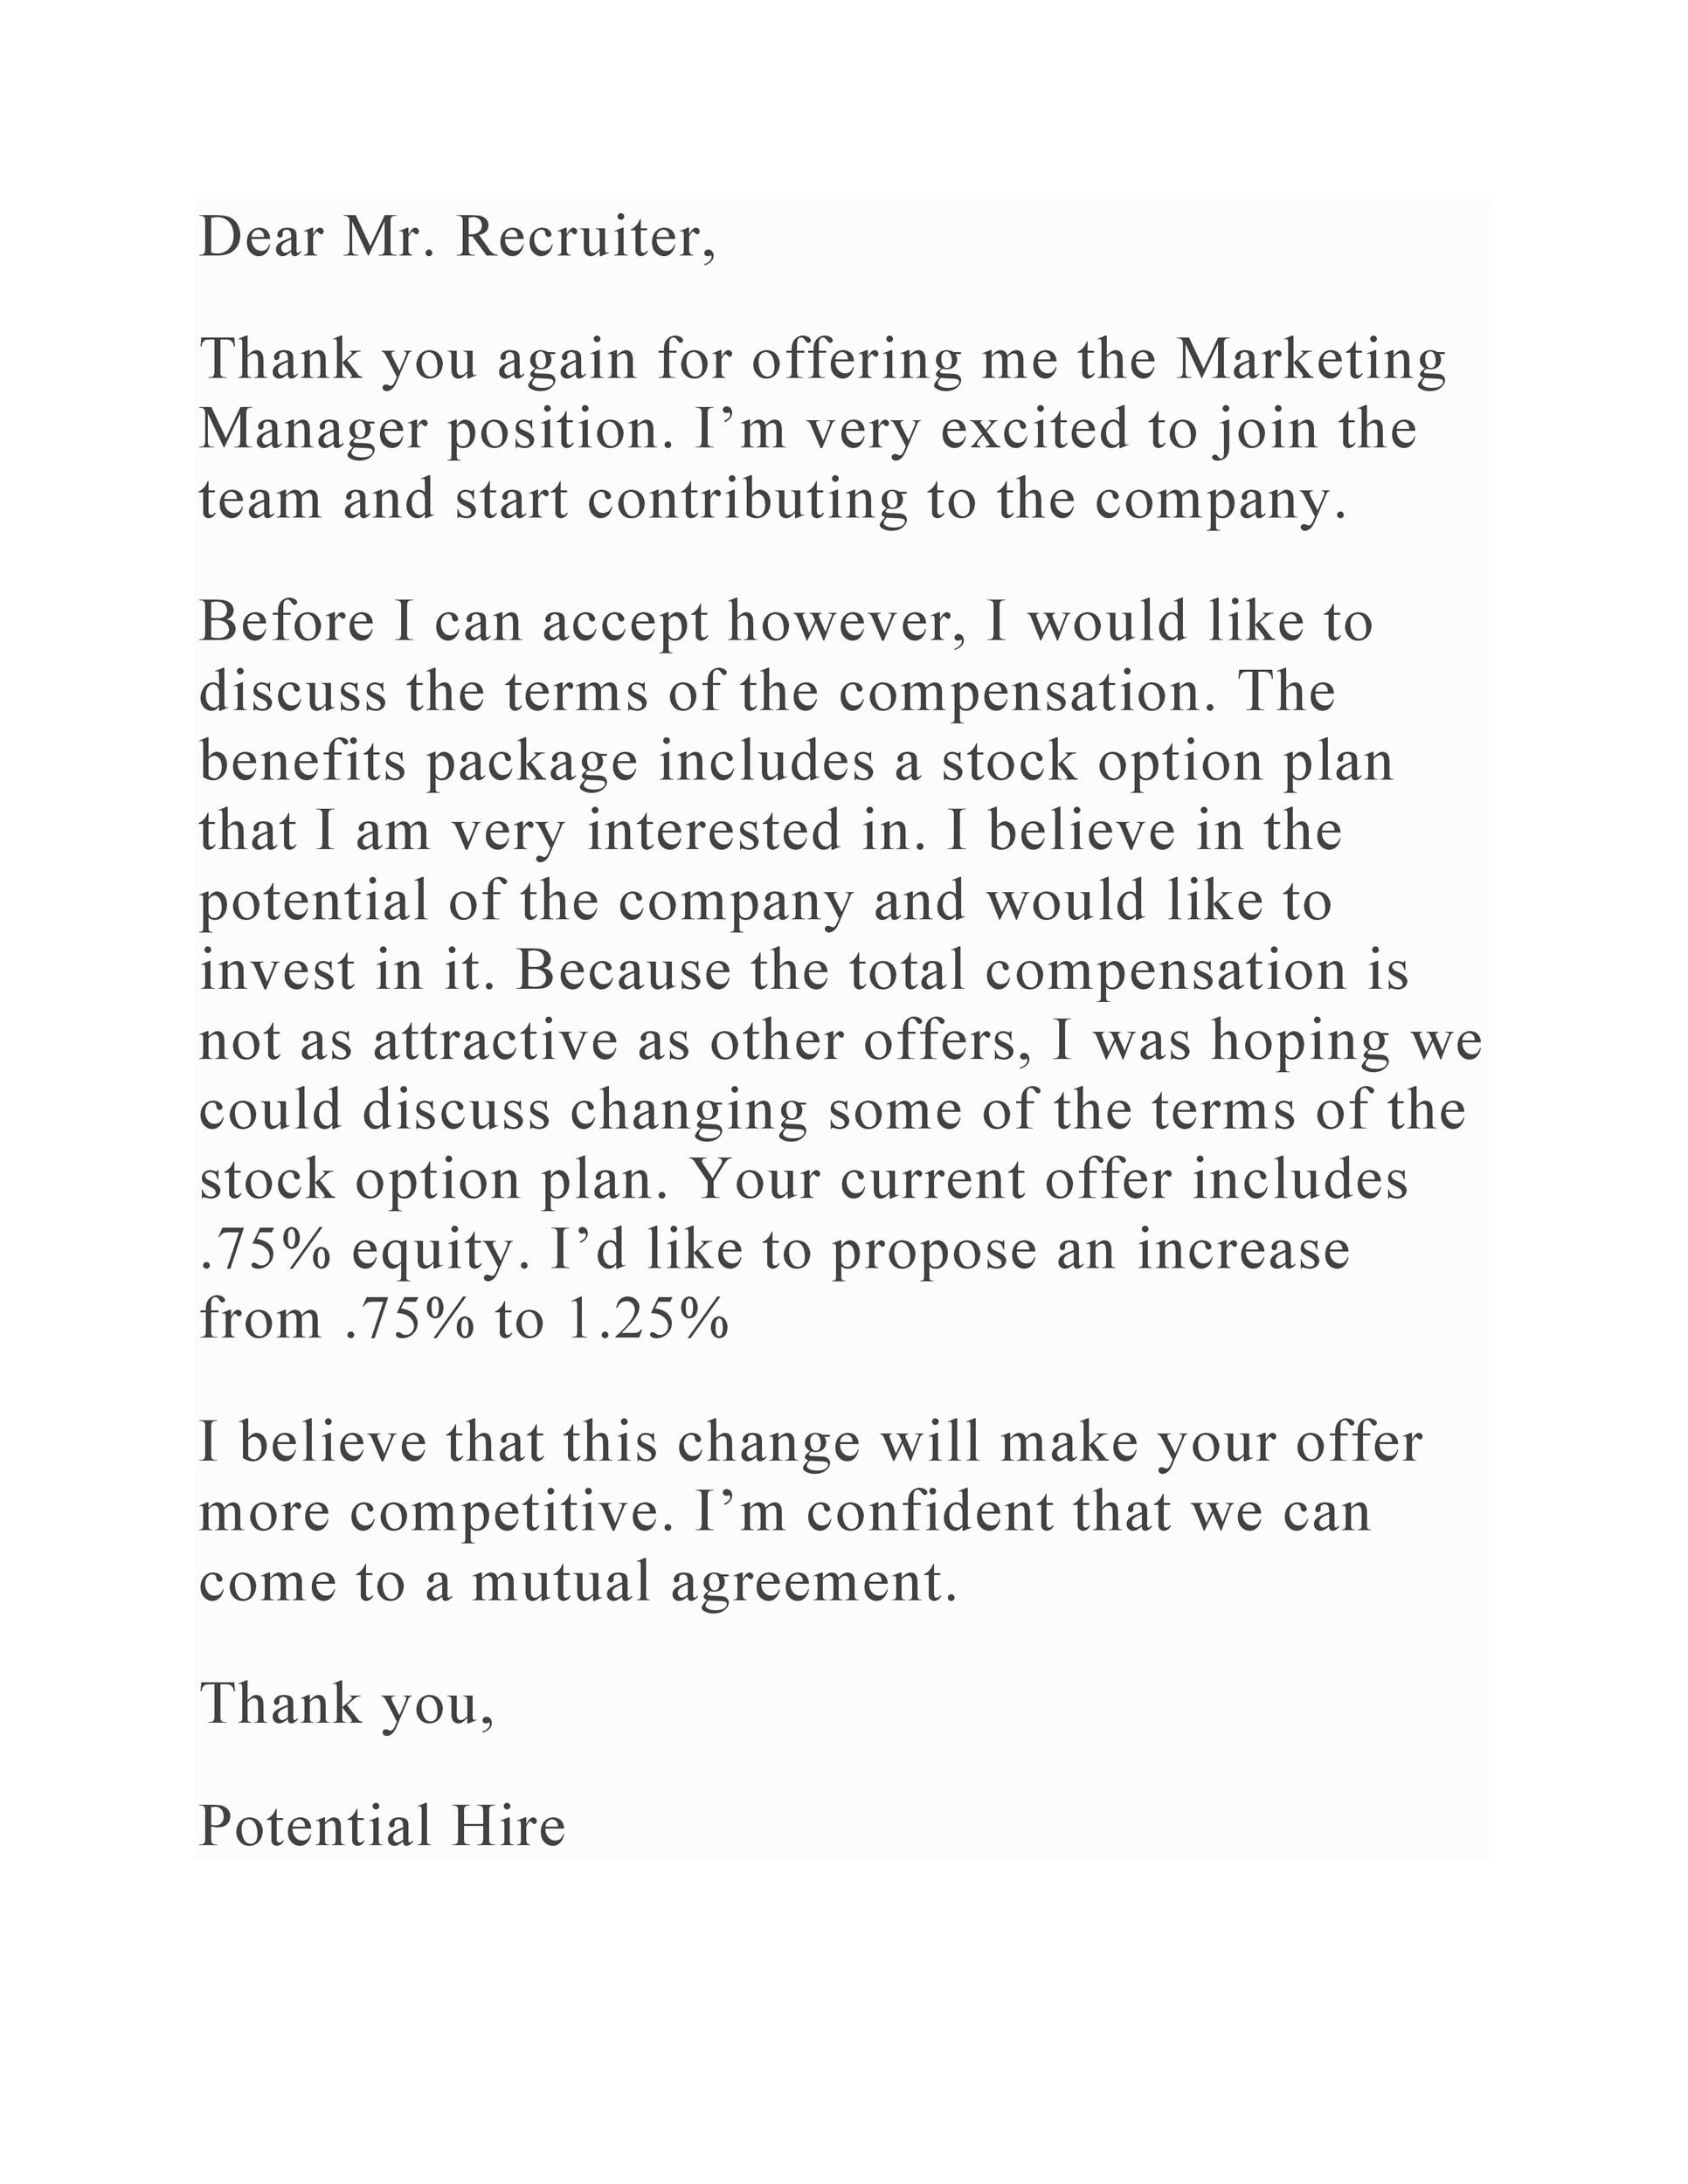 Free salary negotiation letter 15